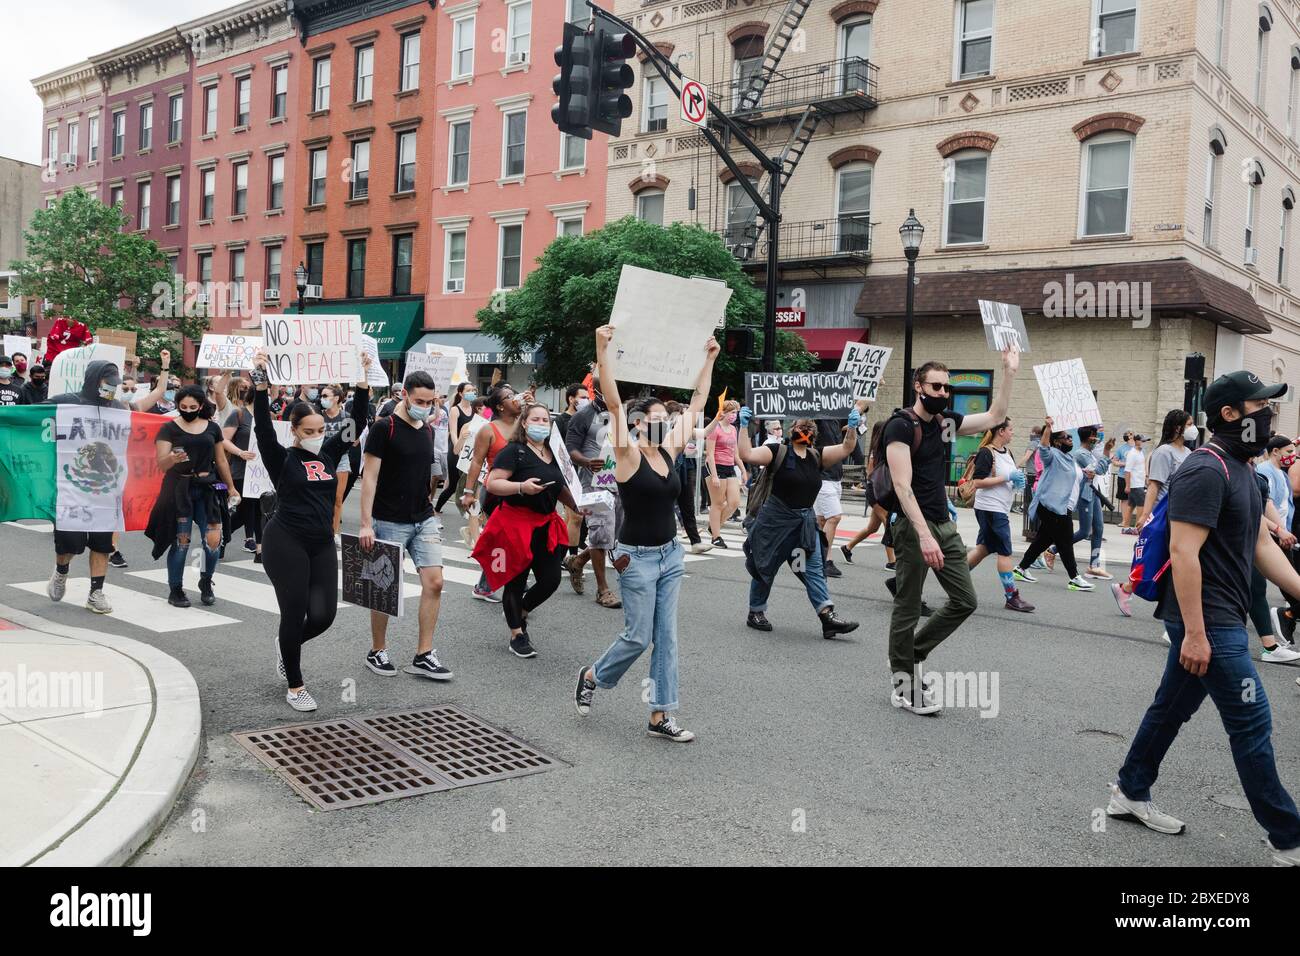 Hoboken, NJ / USA - June 5th, 2020: Black Lives Matter Peaceful Protest in Hoboken, New Jersey to advocate against anti-racism, police brutality Stock Photo